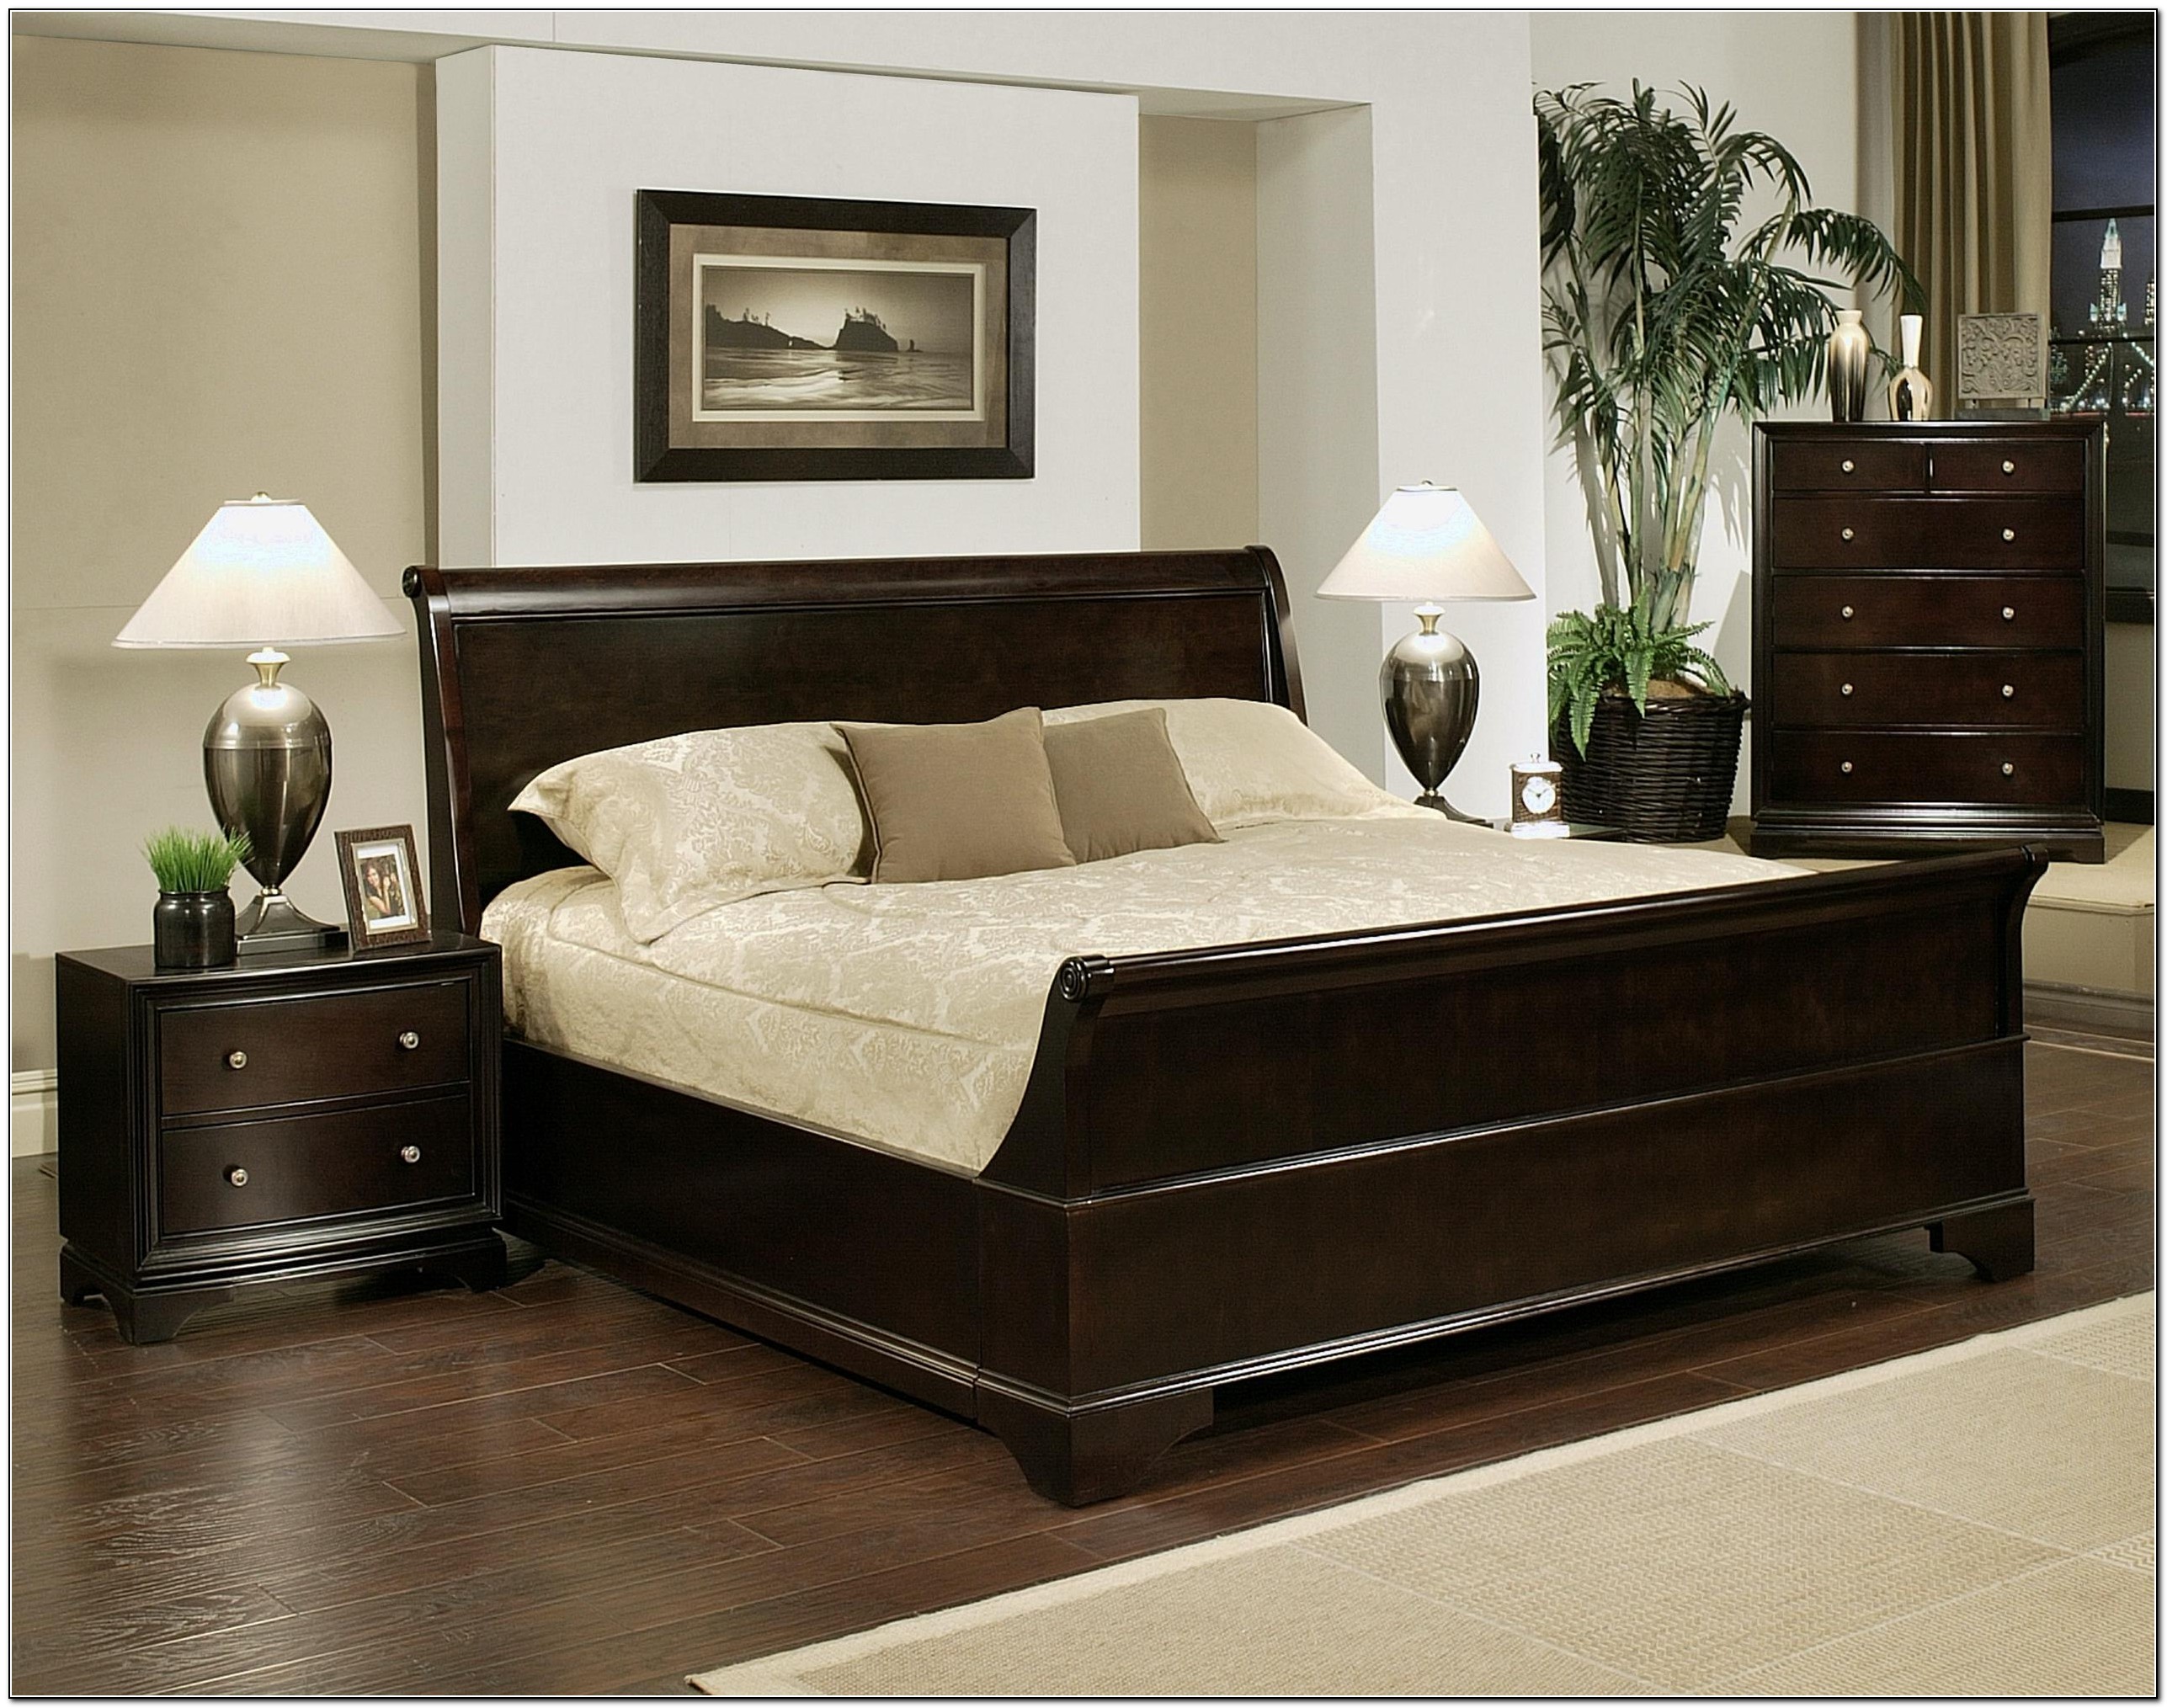 King Size Bed Frame Ideas